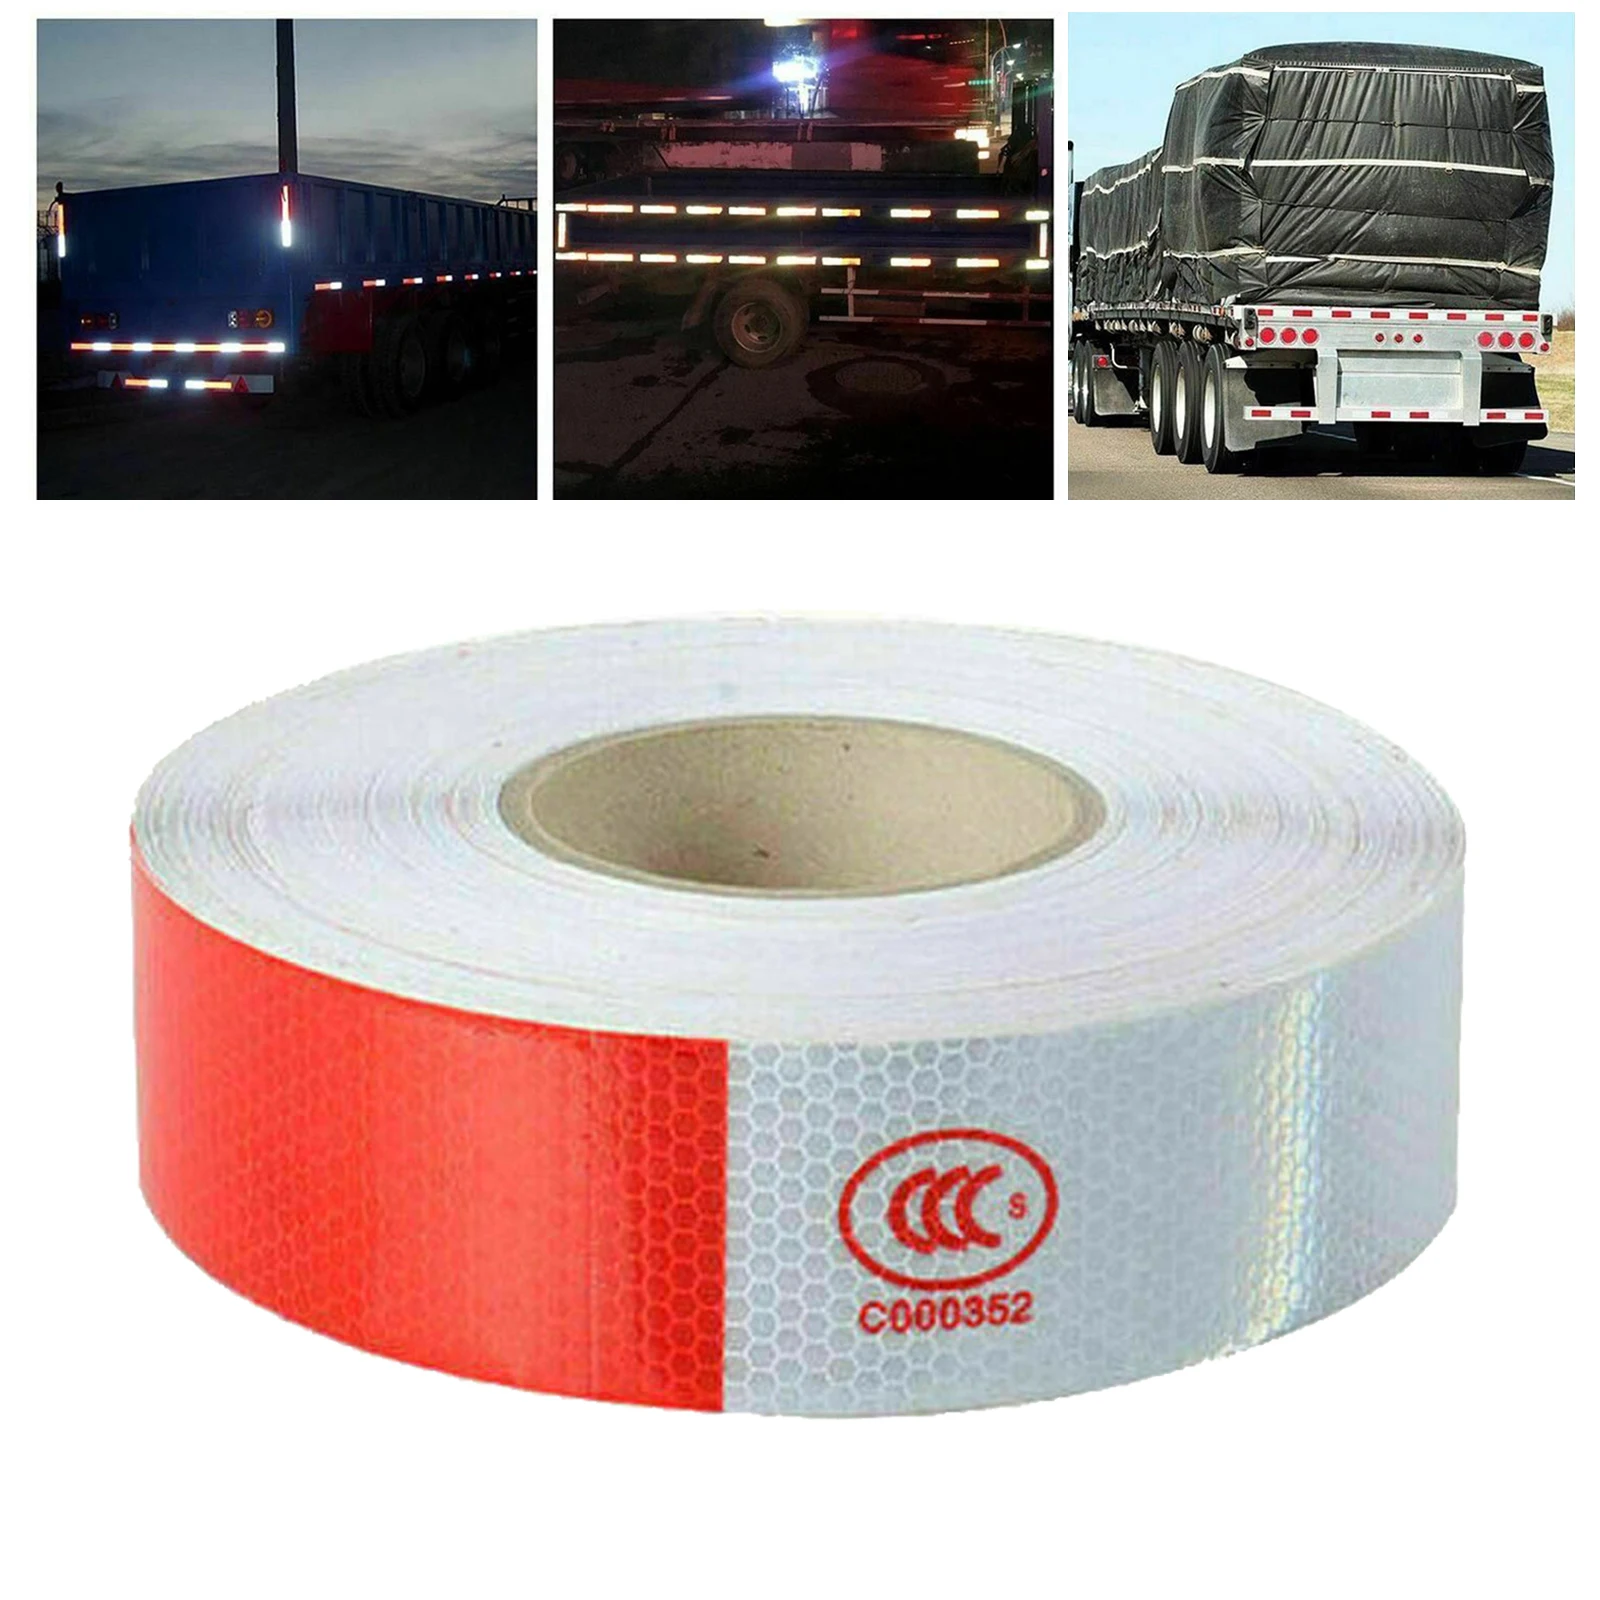 Reflective Tape Sticker Adhesive Safety Mark Warning Tape Bike Automobiles Motorcycle Car Styling